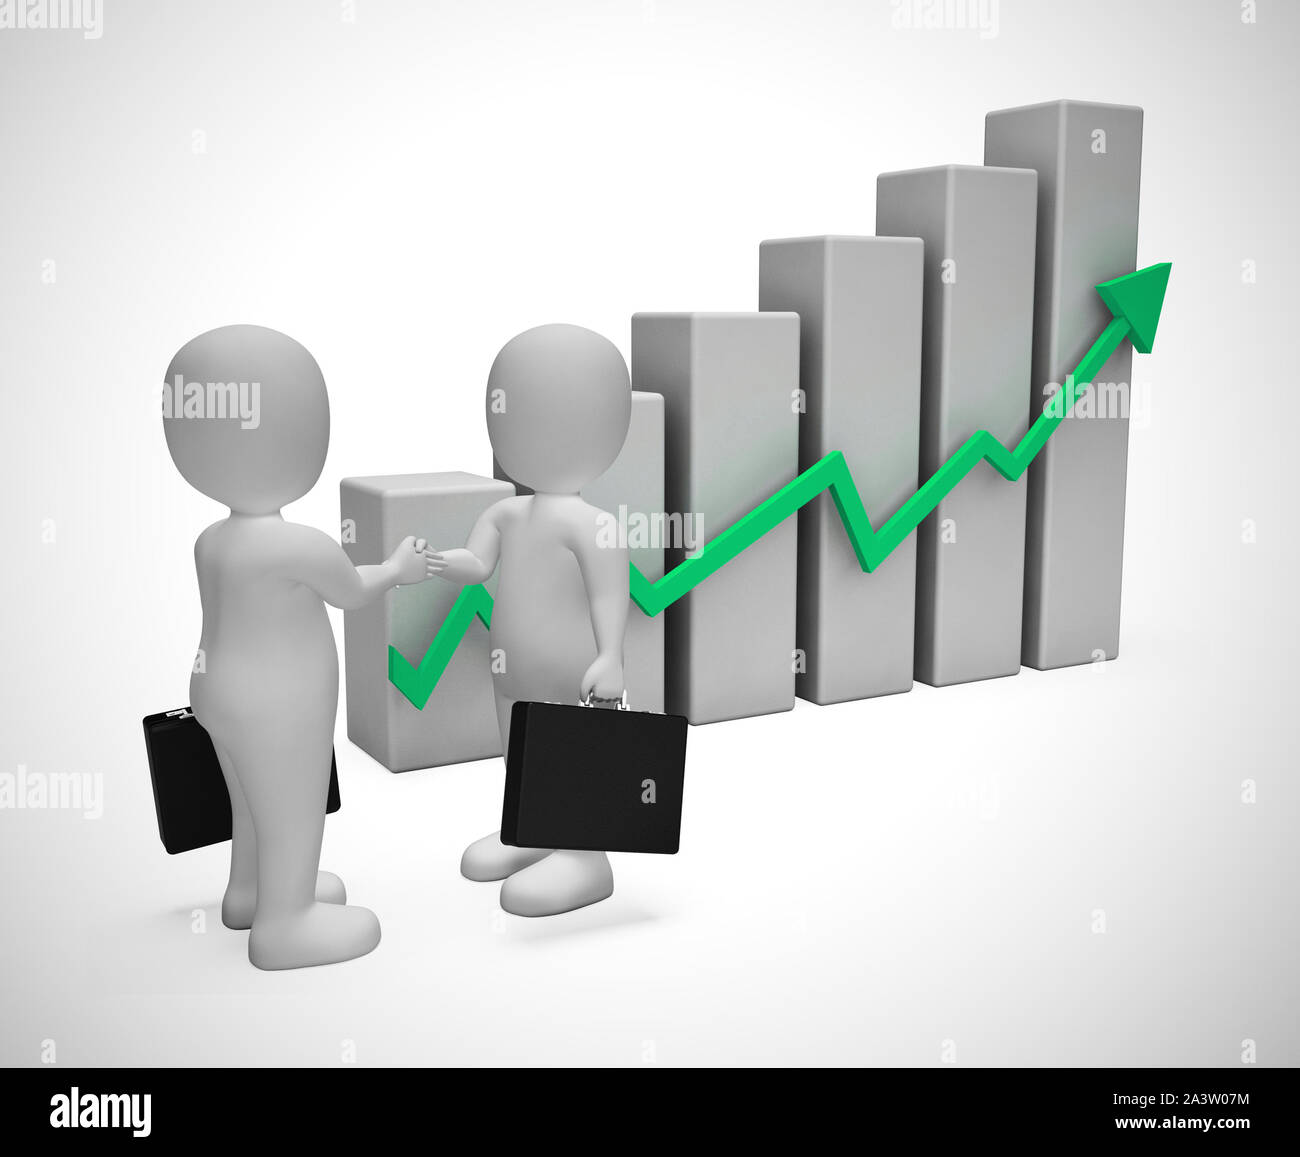 Graph going upwards means success and increased profits. Business growing and trends higher for gain - 3d illustration Stock Photo